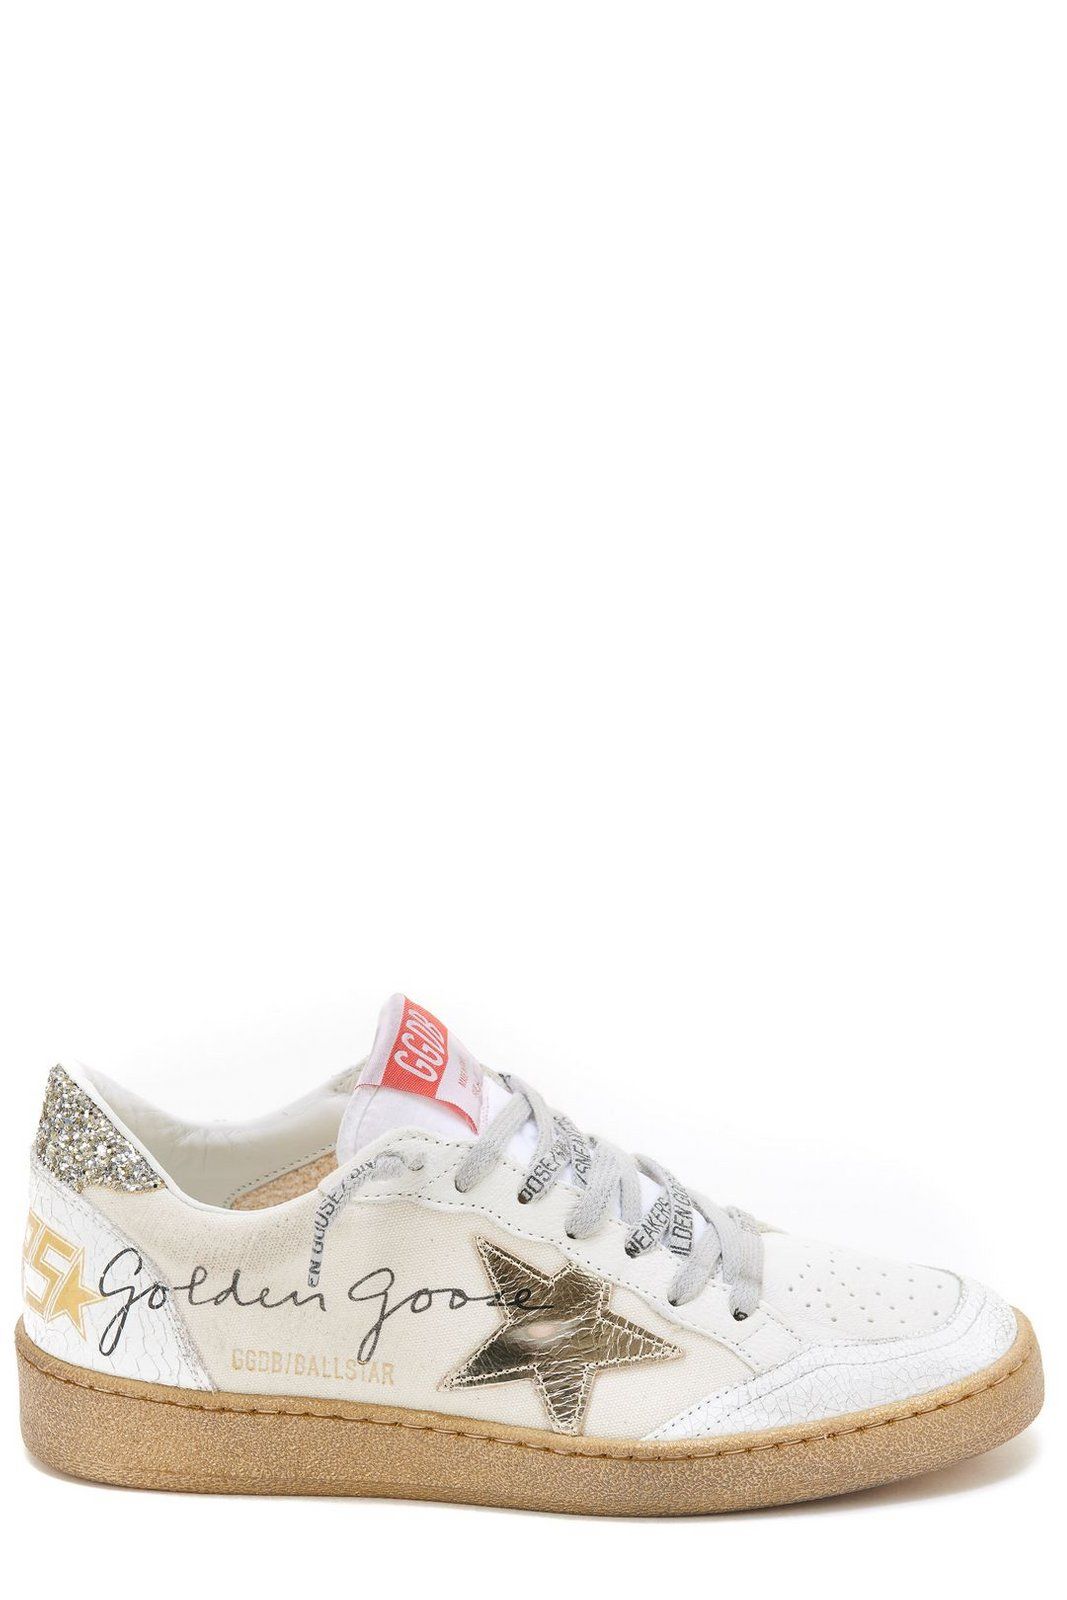 Golden Goose Deluxe Brand Ball Star Lace-Up Sneakers | Cettire Global